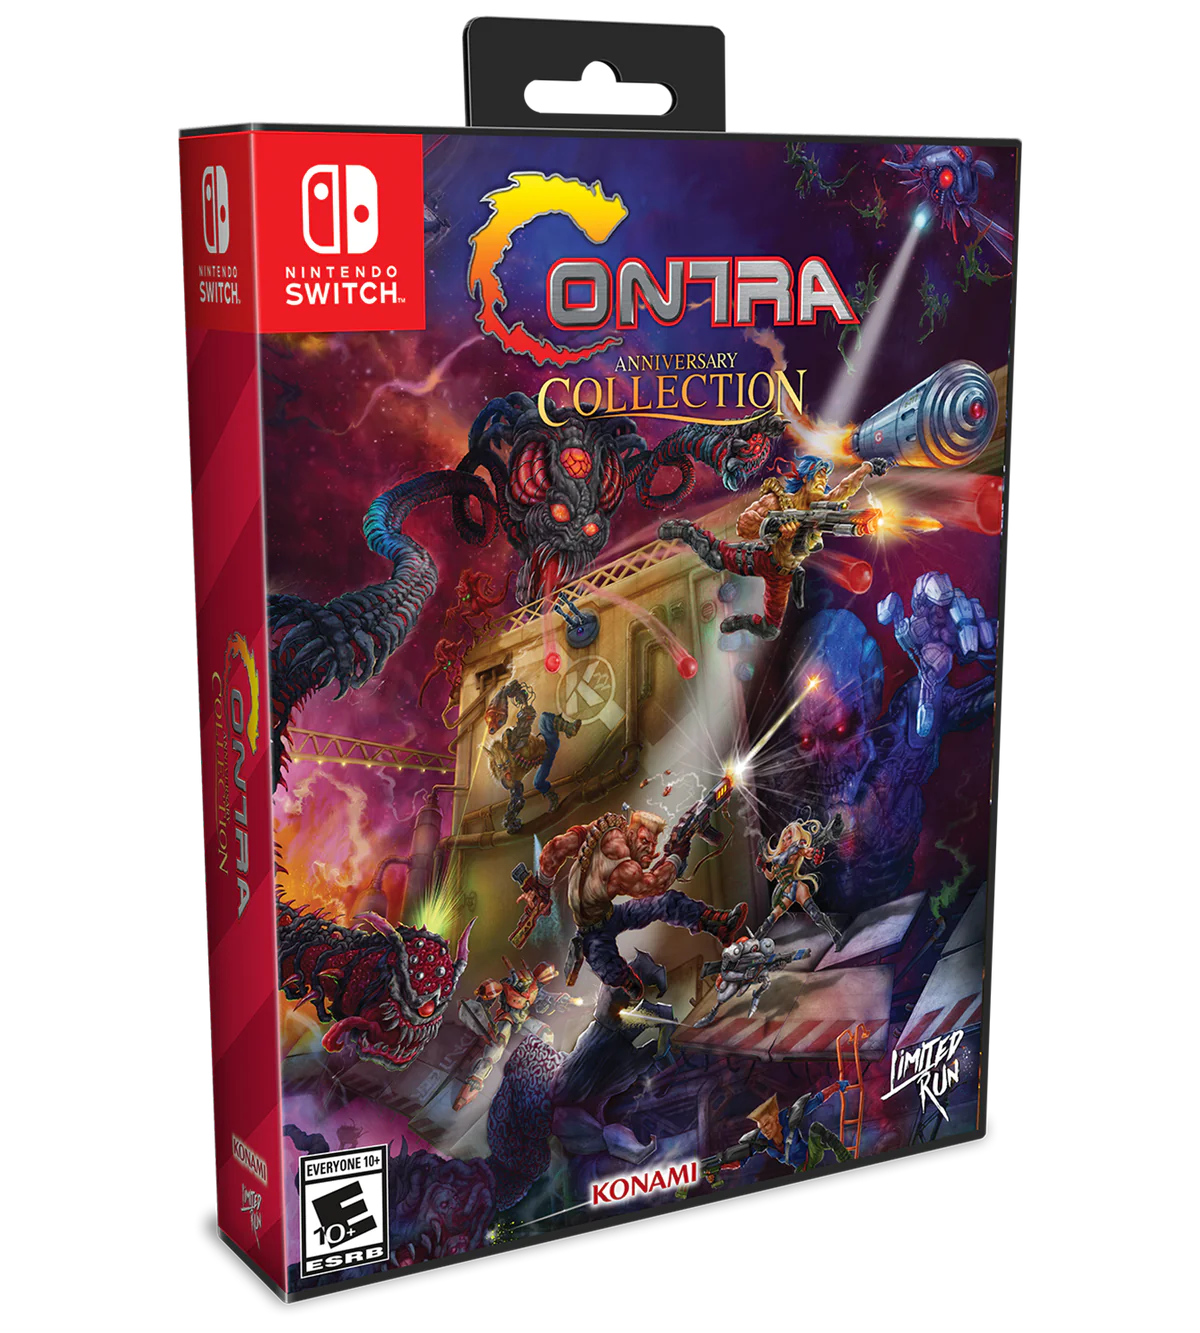 Contra Anniversary Collection on